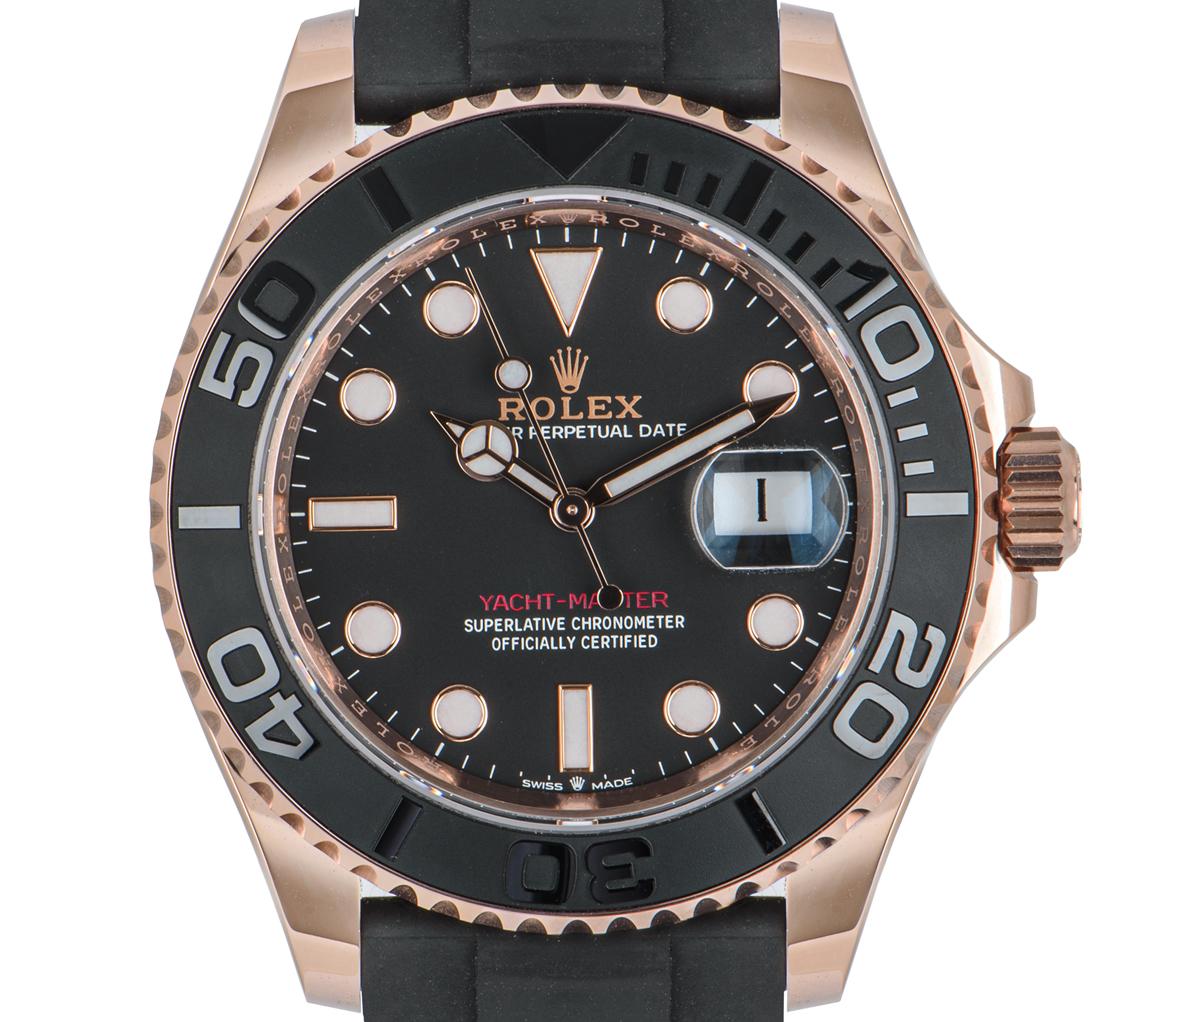 An unworn 40mm Yacht-Master in rose gold by Rolex. Featuring an intense black dial with the date and a matt black ceramic bidirectional rotatable bezel with raised 60-minute numerals and graduations.

The black Oysterflex bracelet comes with a